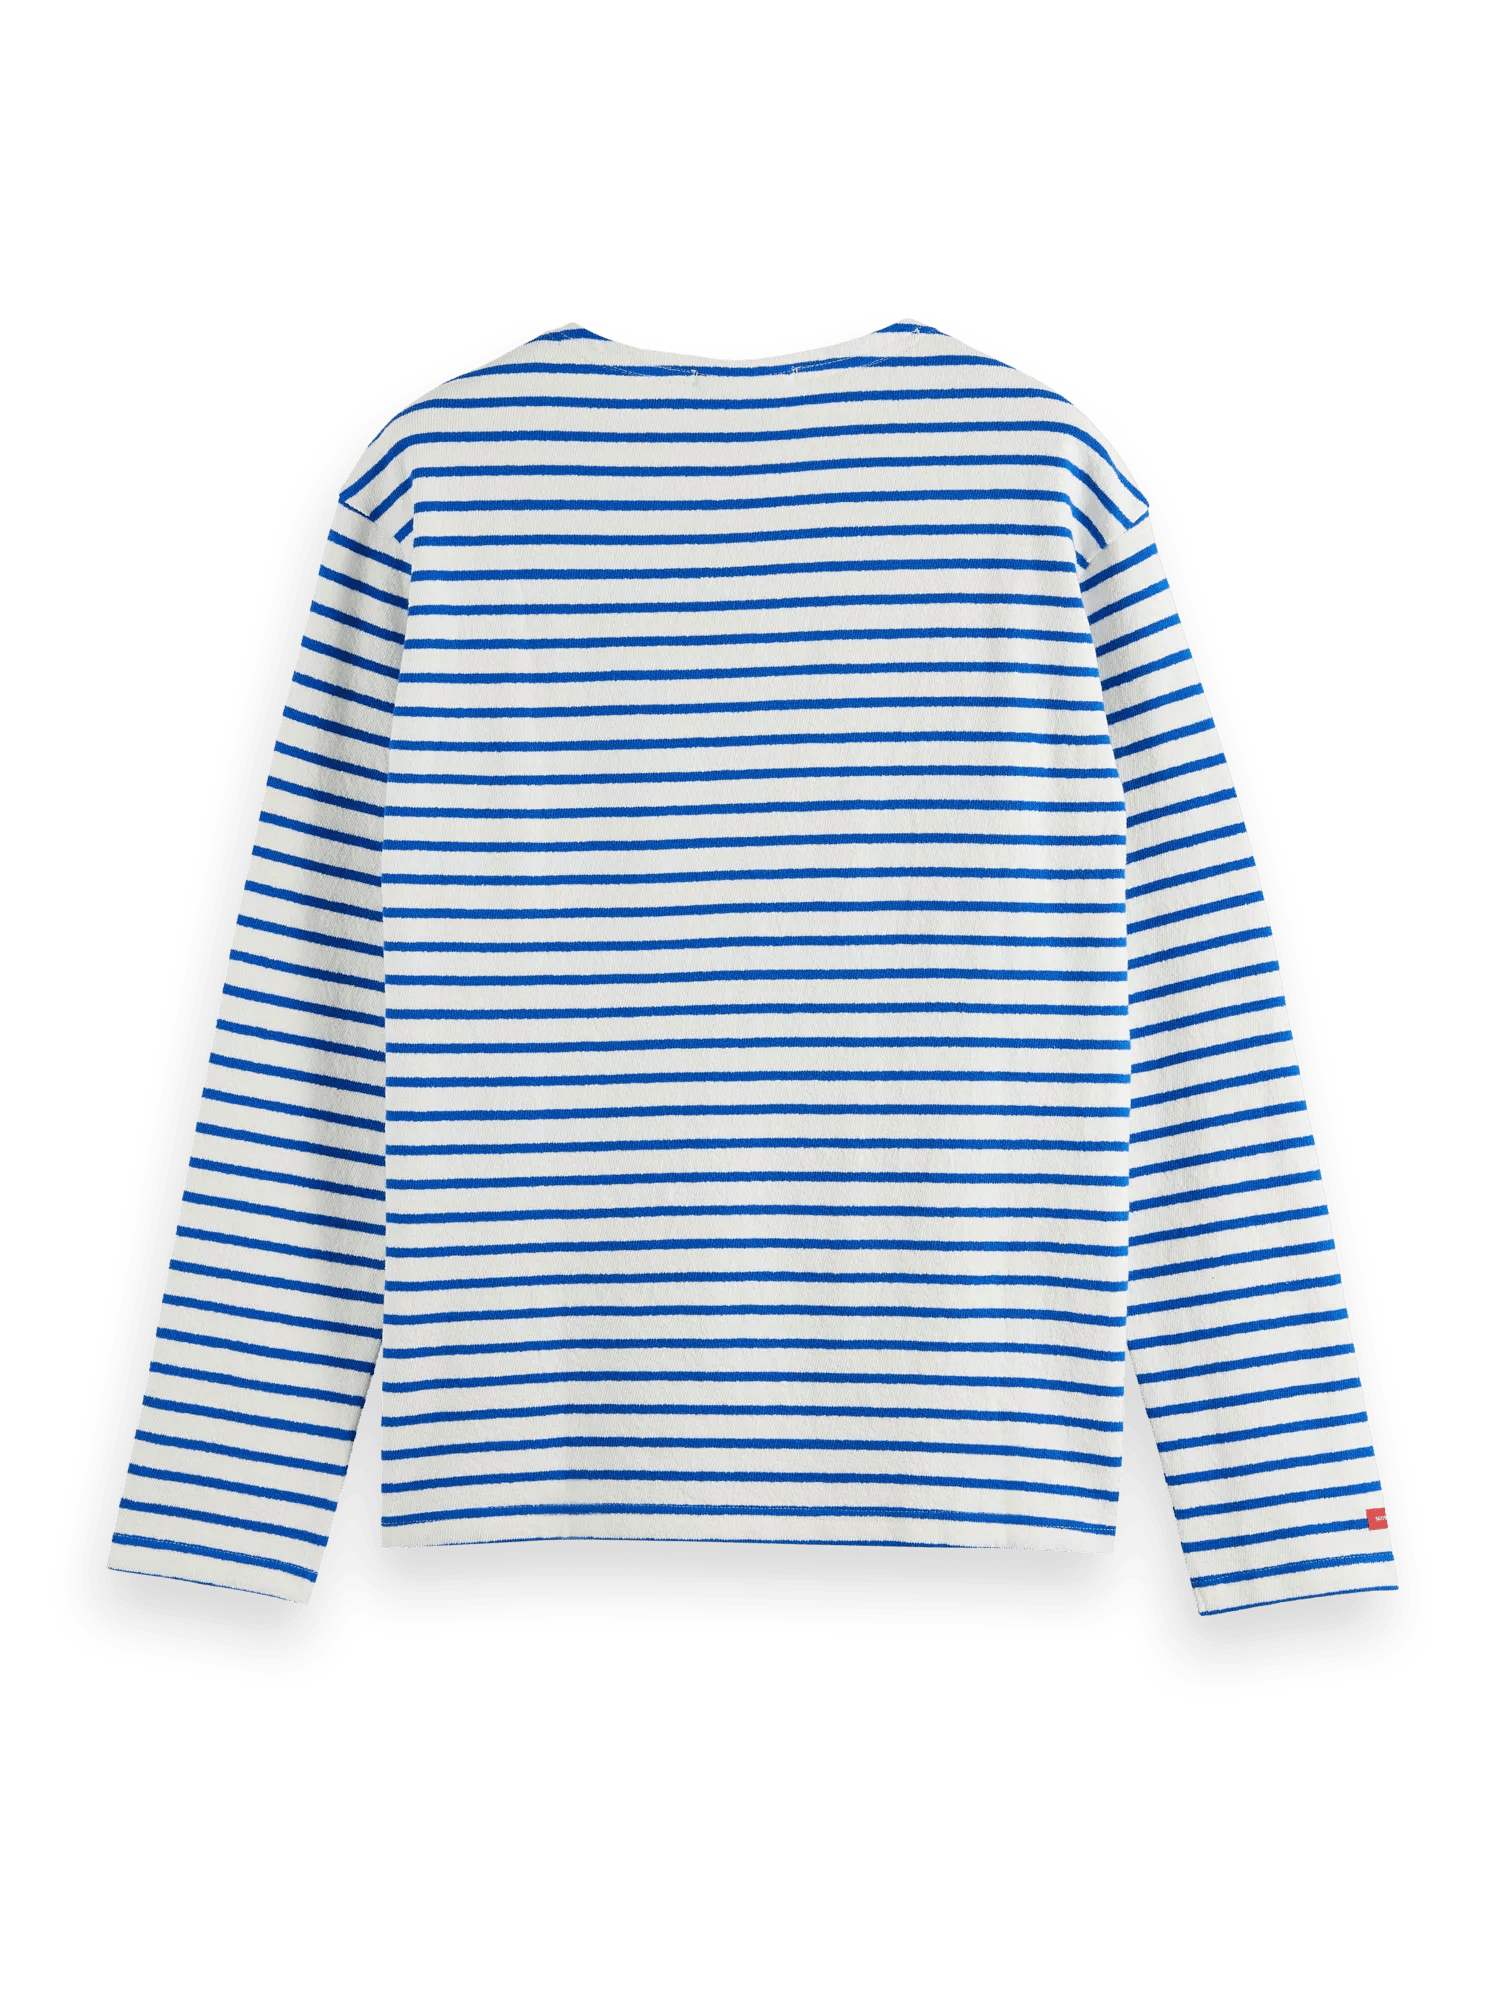 Scotch & Soda Relaxed fit striped long-sleeved T-shirt BCK